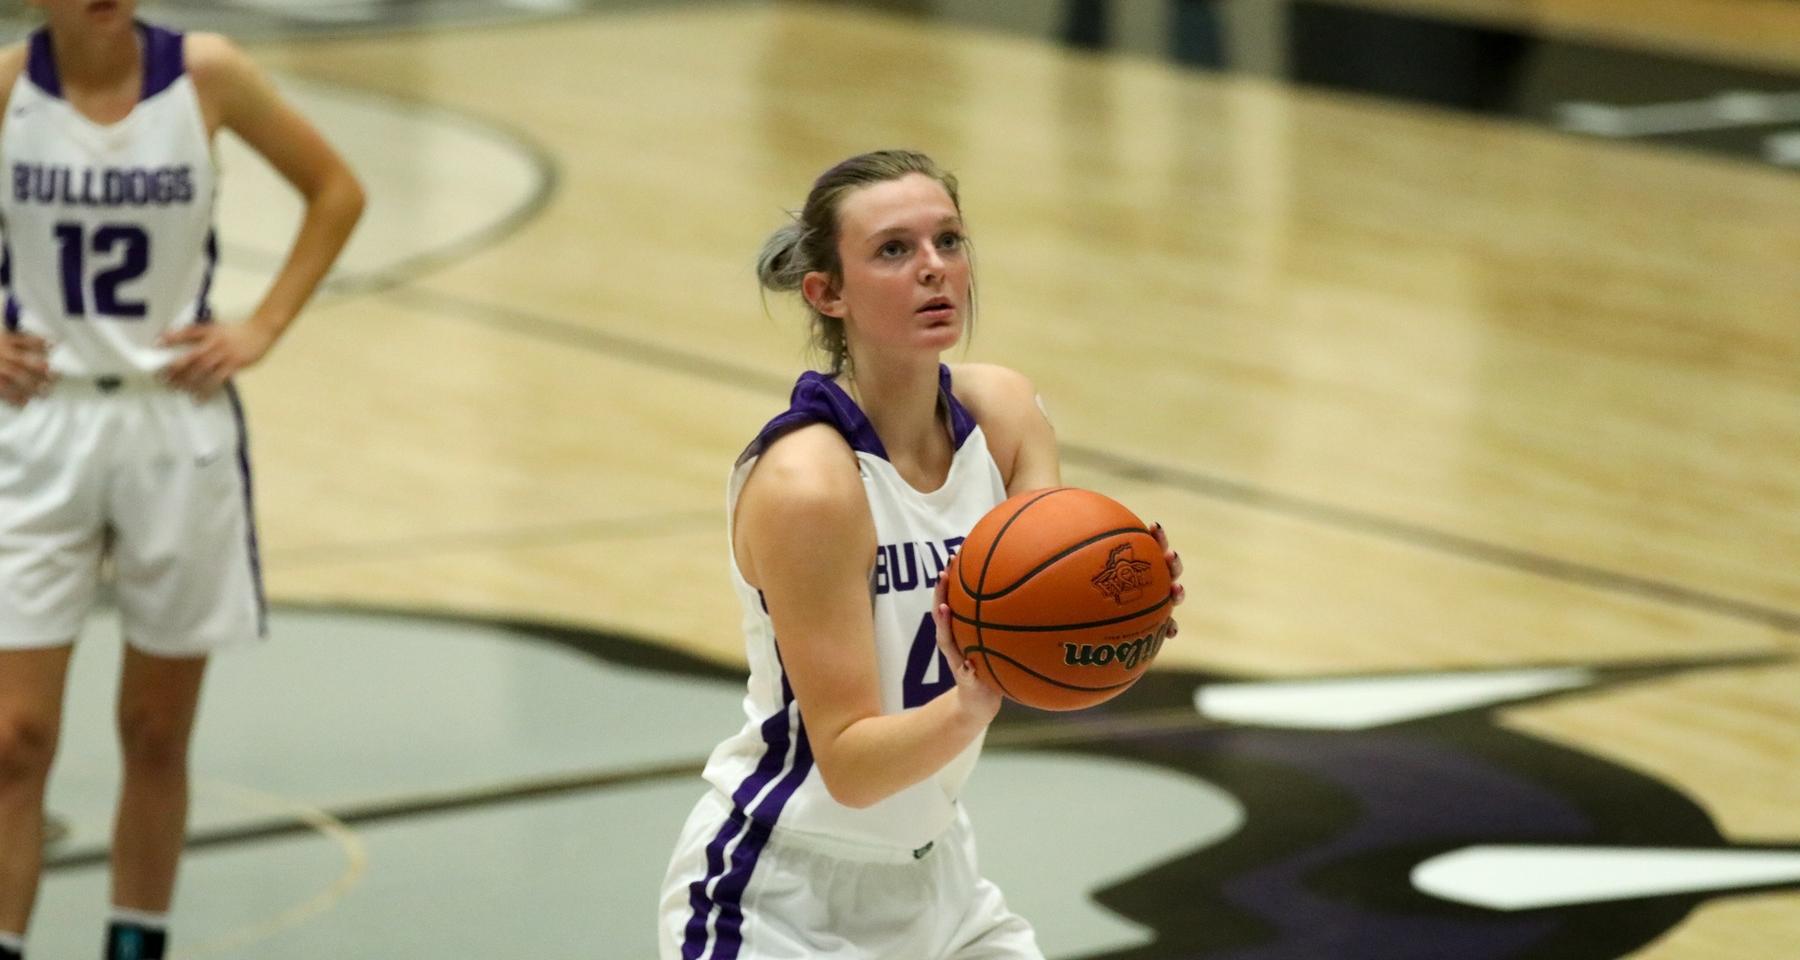 Fourth quarter run seals win for No. 4/6 @bhsdogsghoops over Plainfield